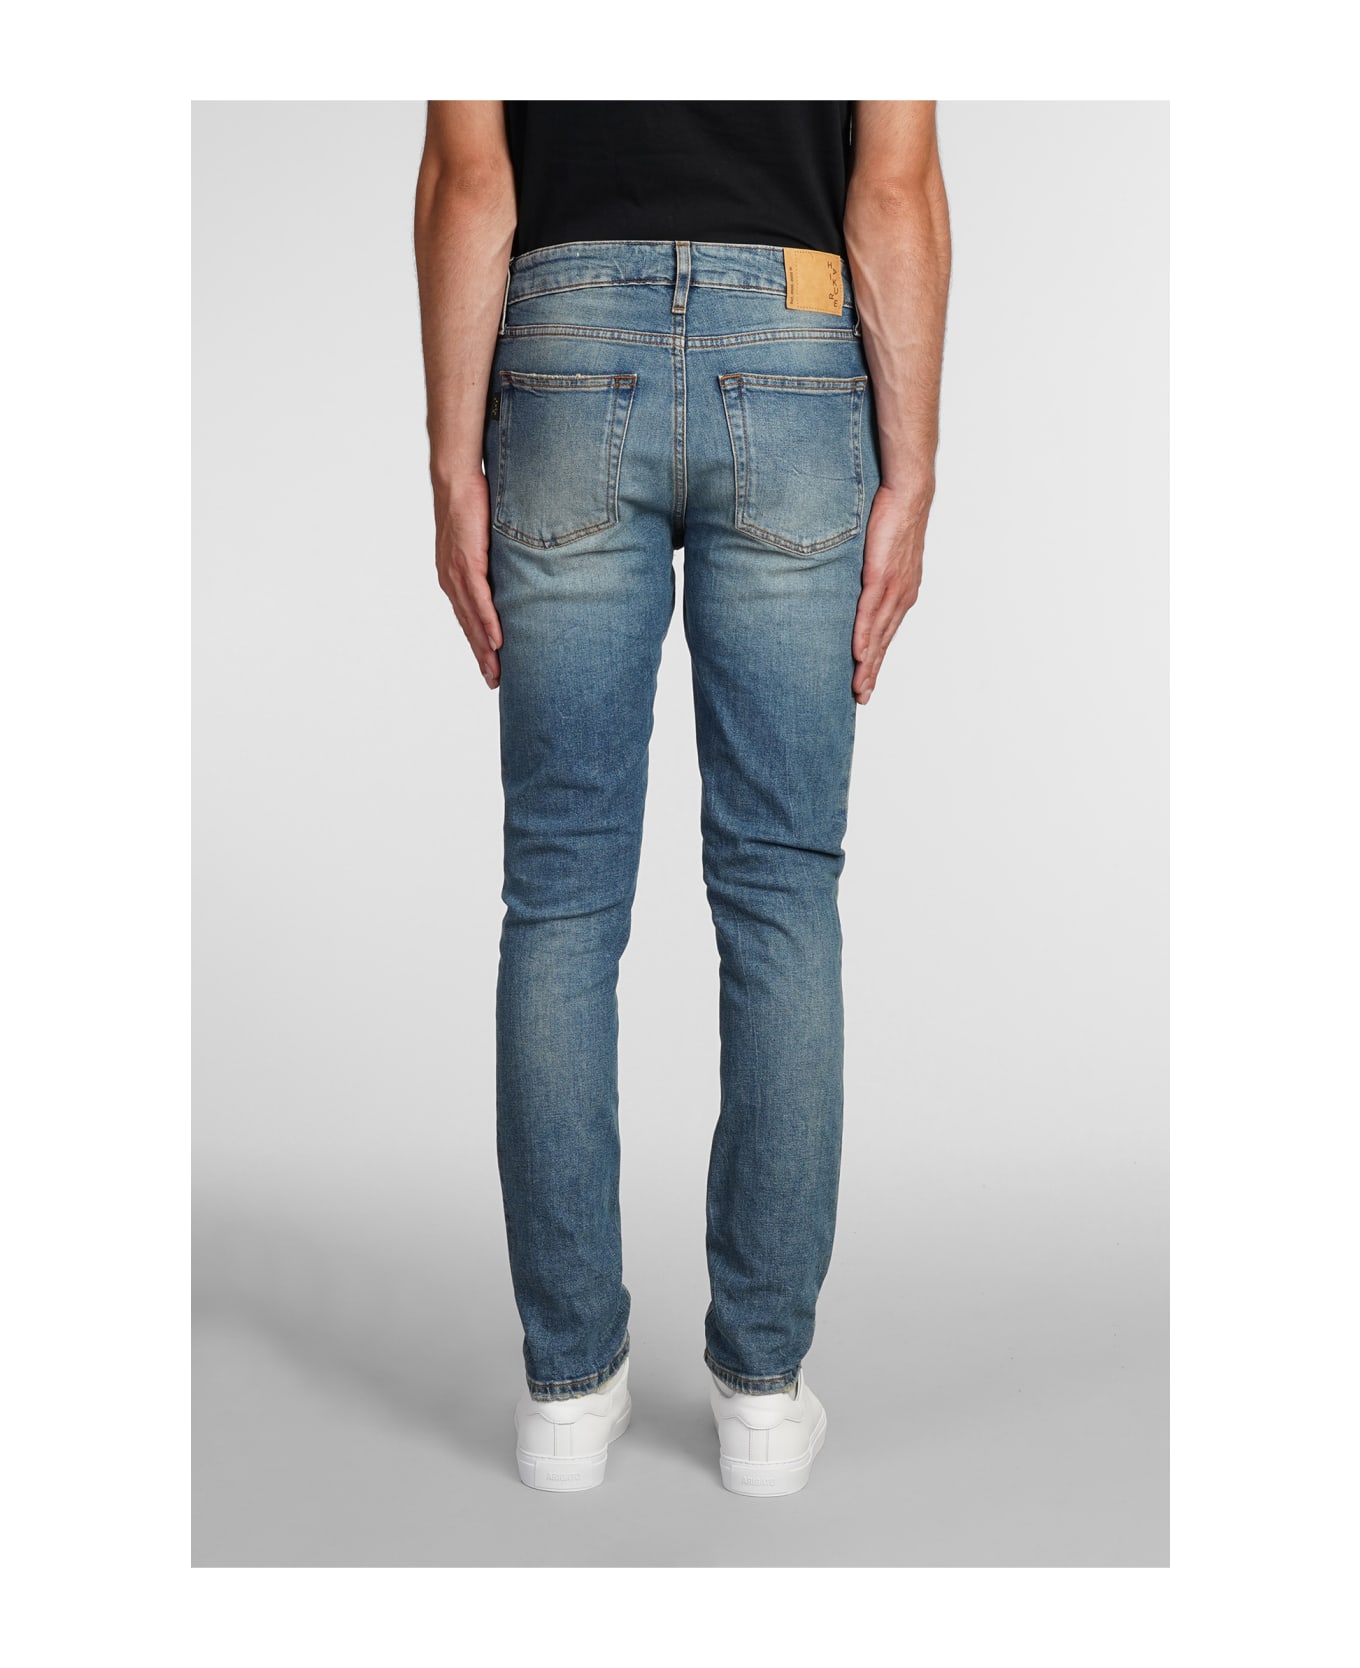 Haikure Cleveland Jeans In Blue Cotton - blue